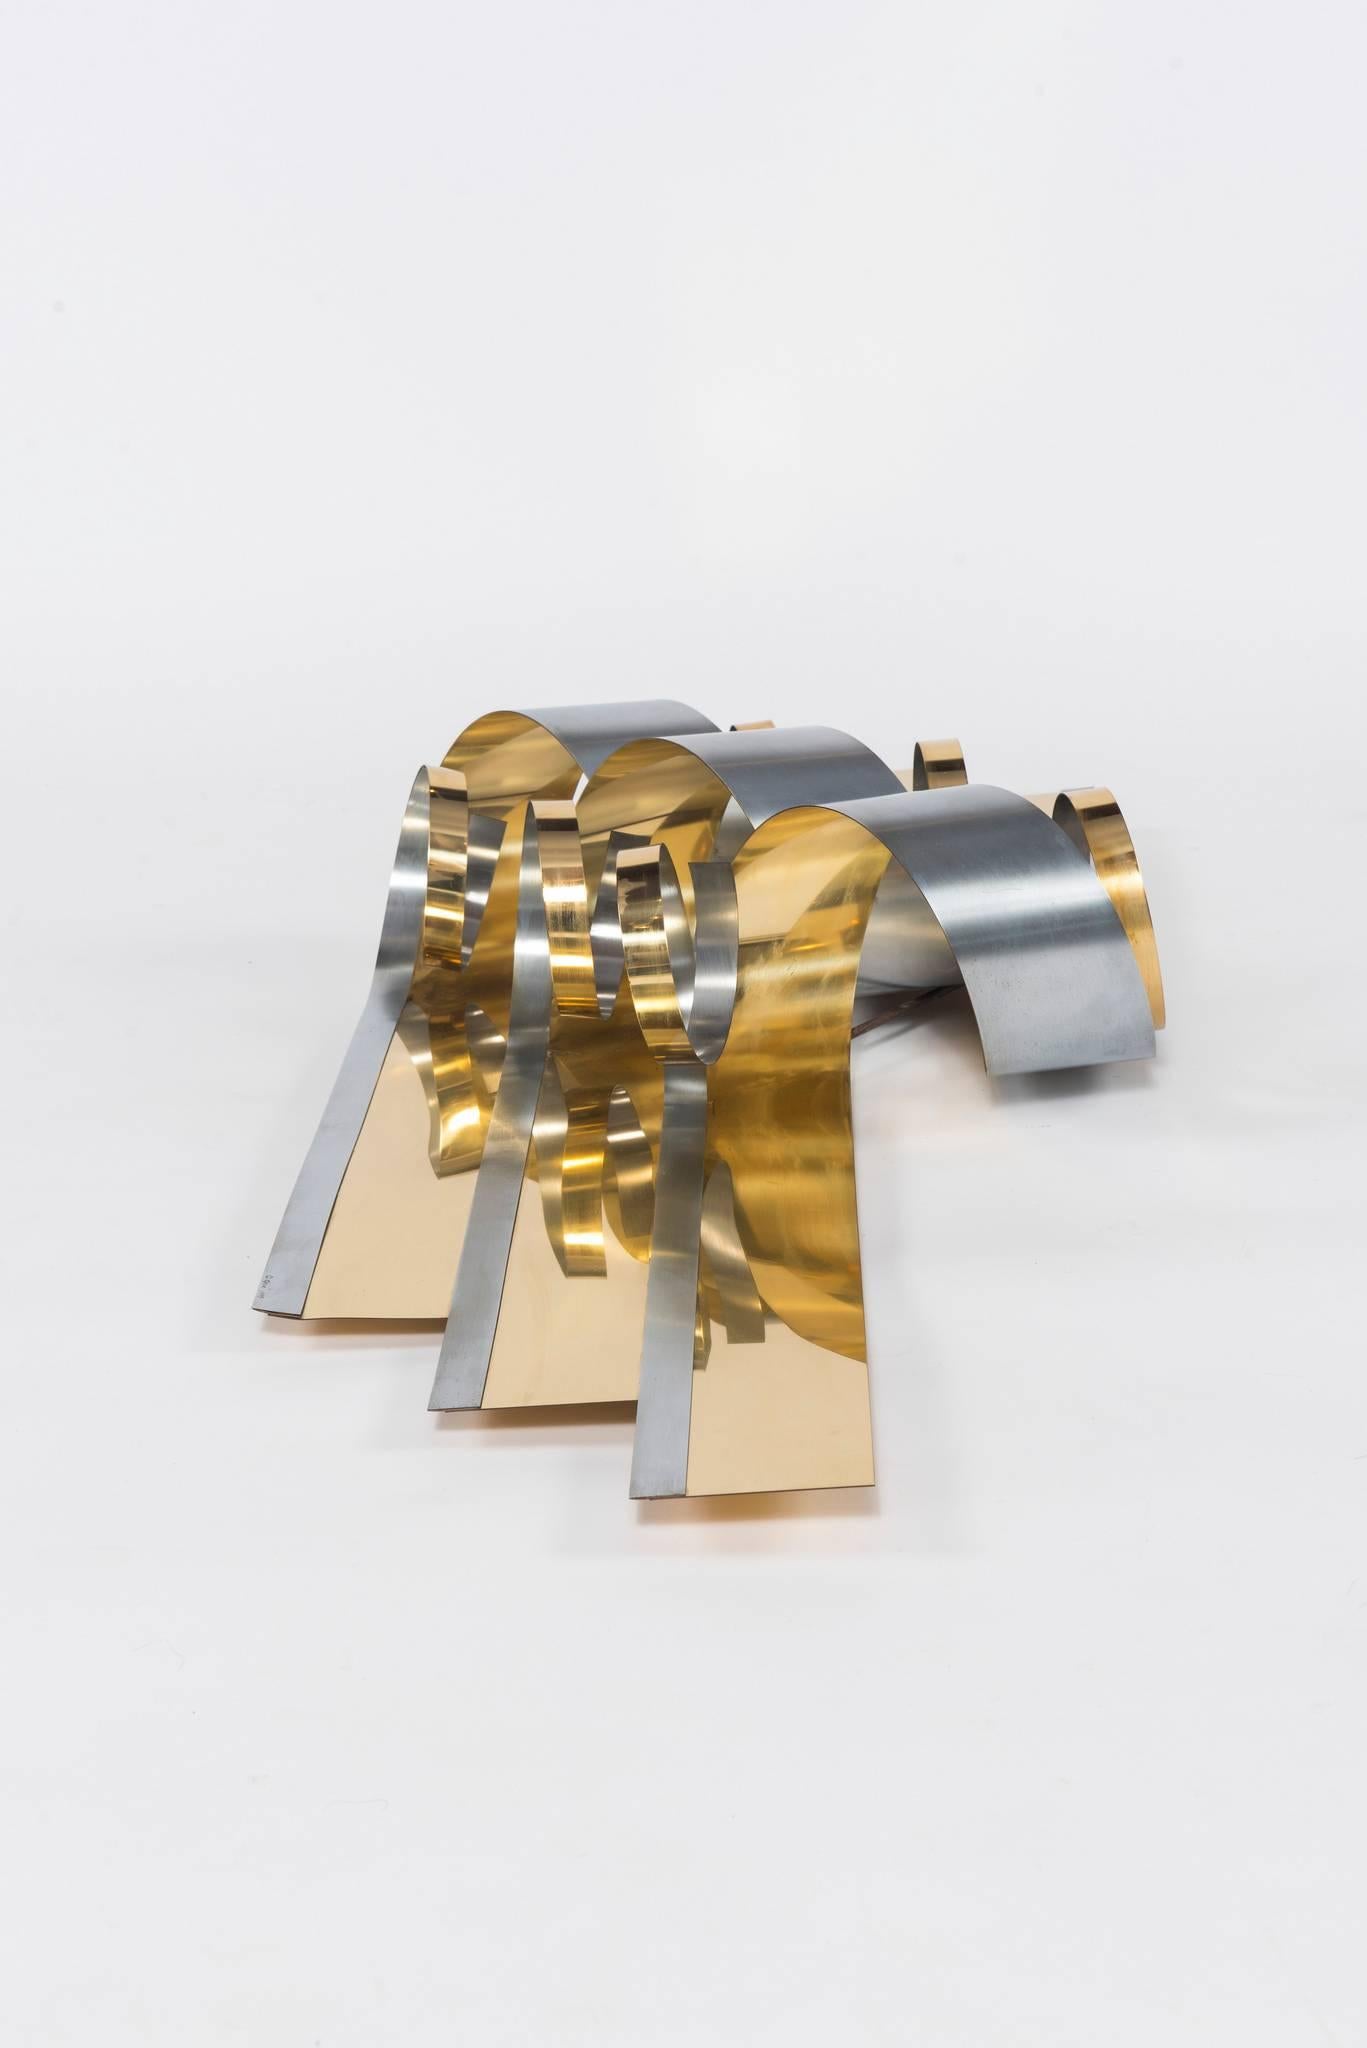 Modern Curtis Jere 1989 Brass and Steel Ribbon Sculpture For Sale